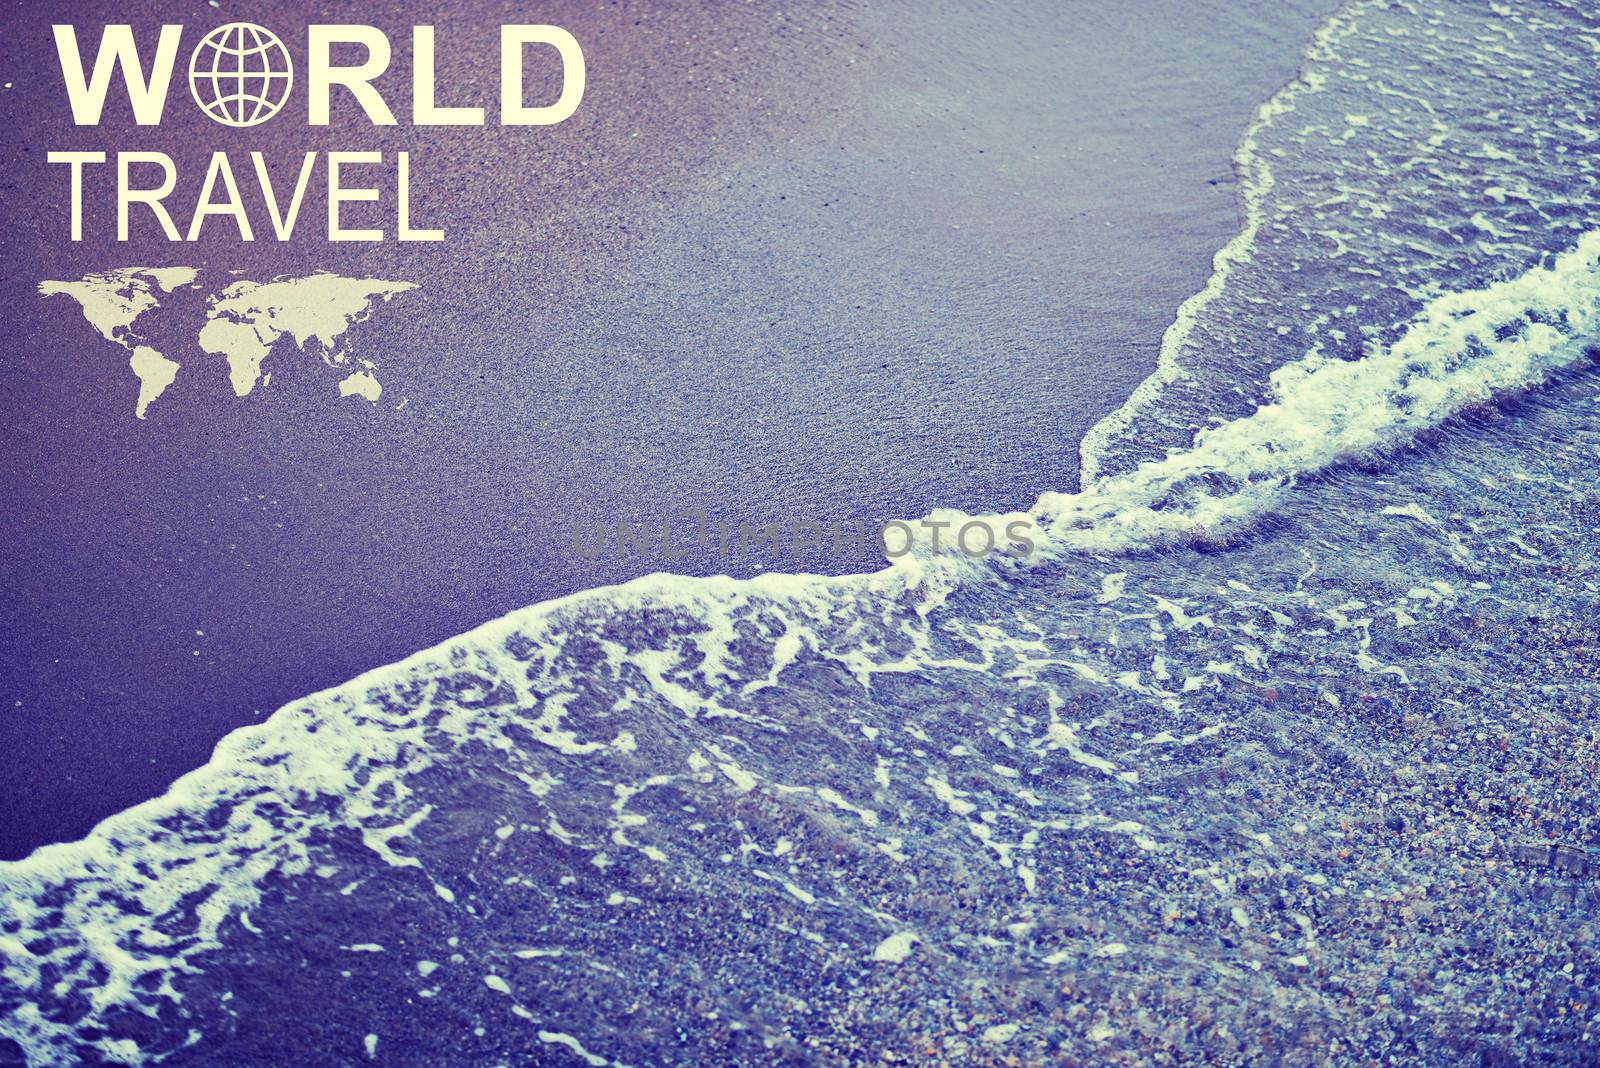 Sea wave on shore, close-up view. Inscription World Travel, related symbol and small image of Earth continents